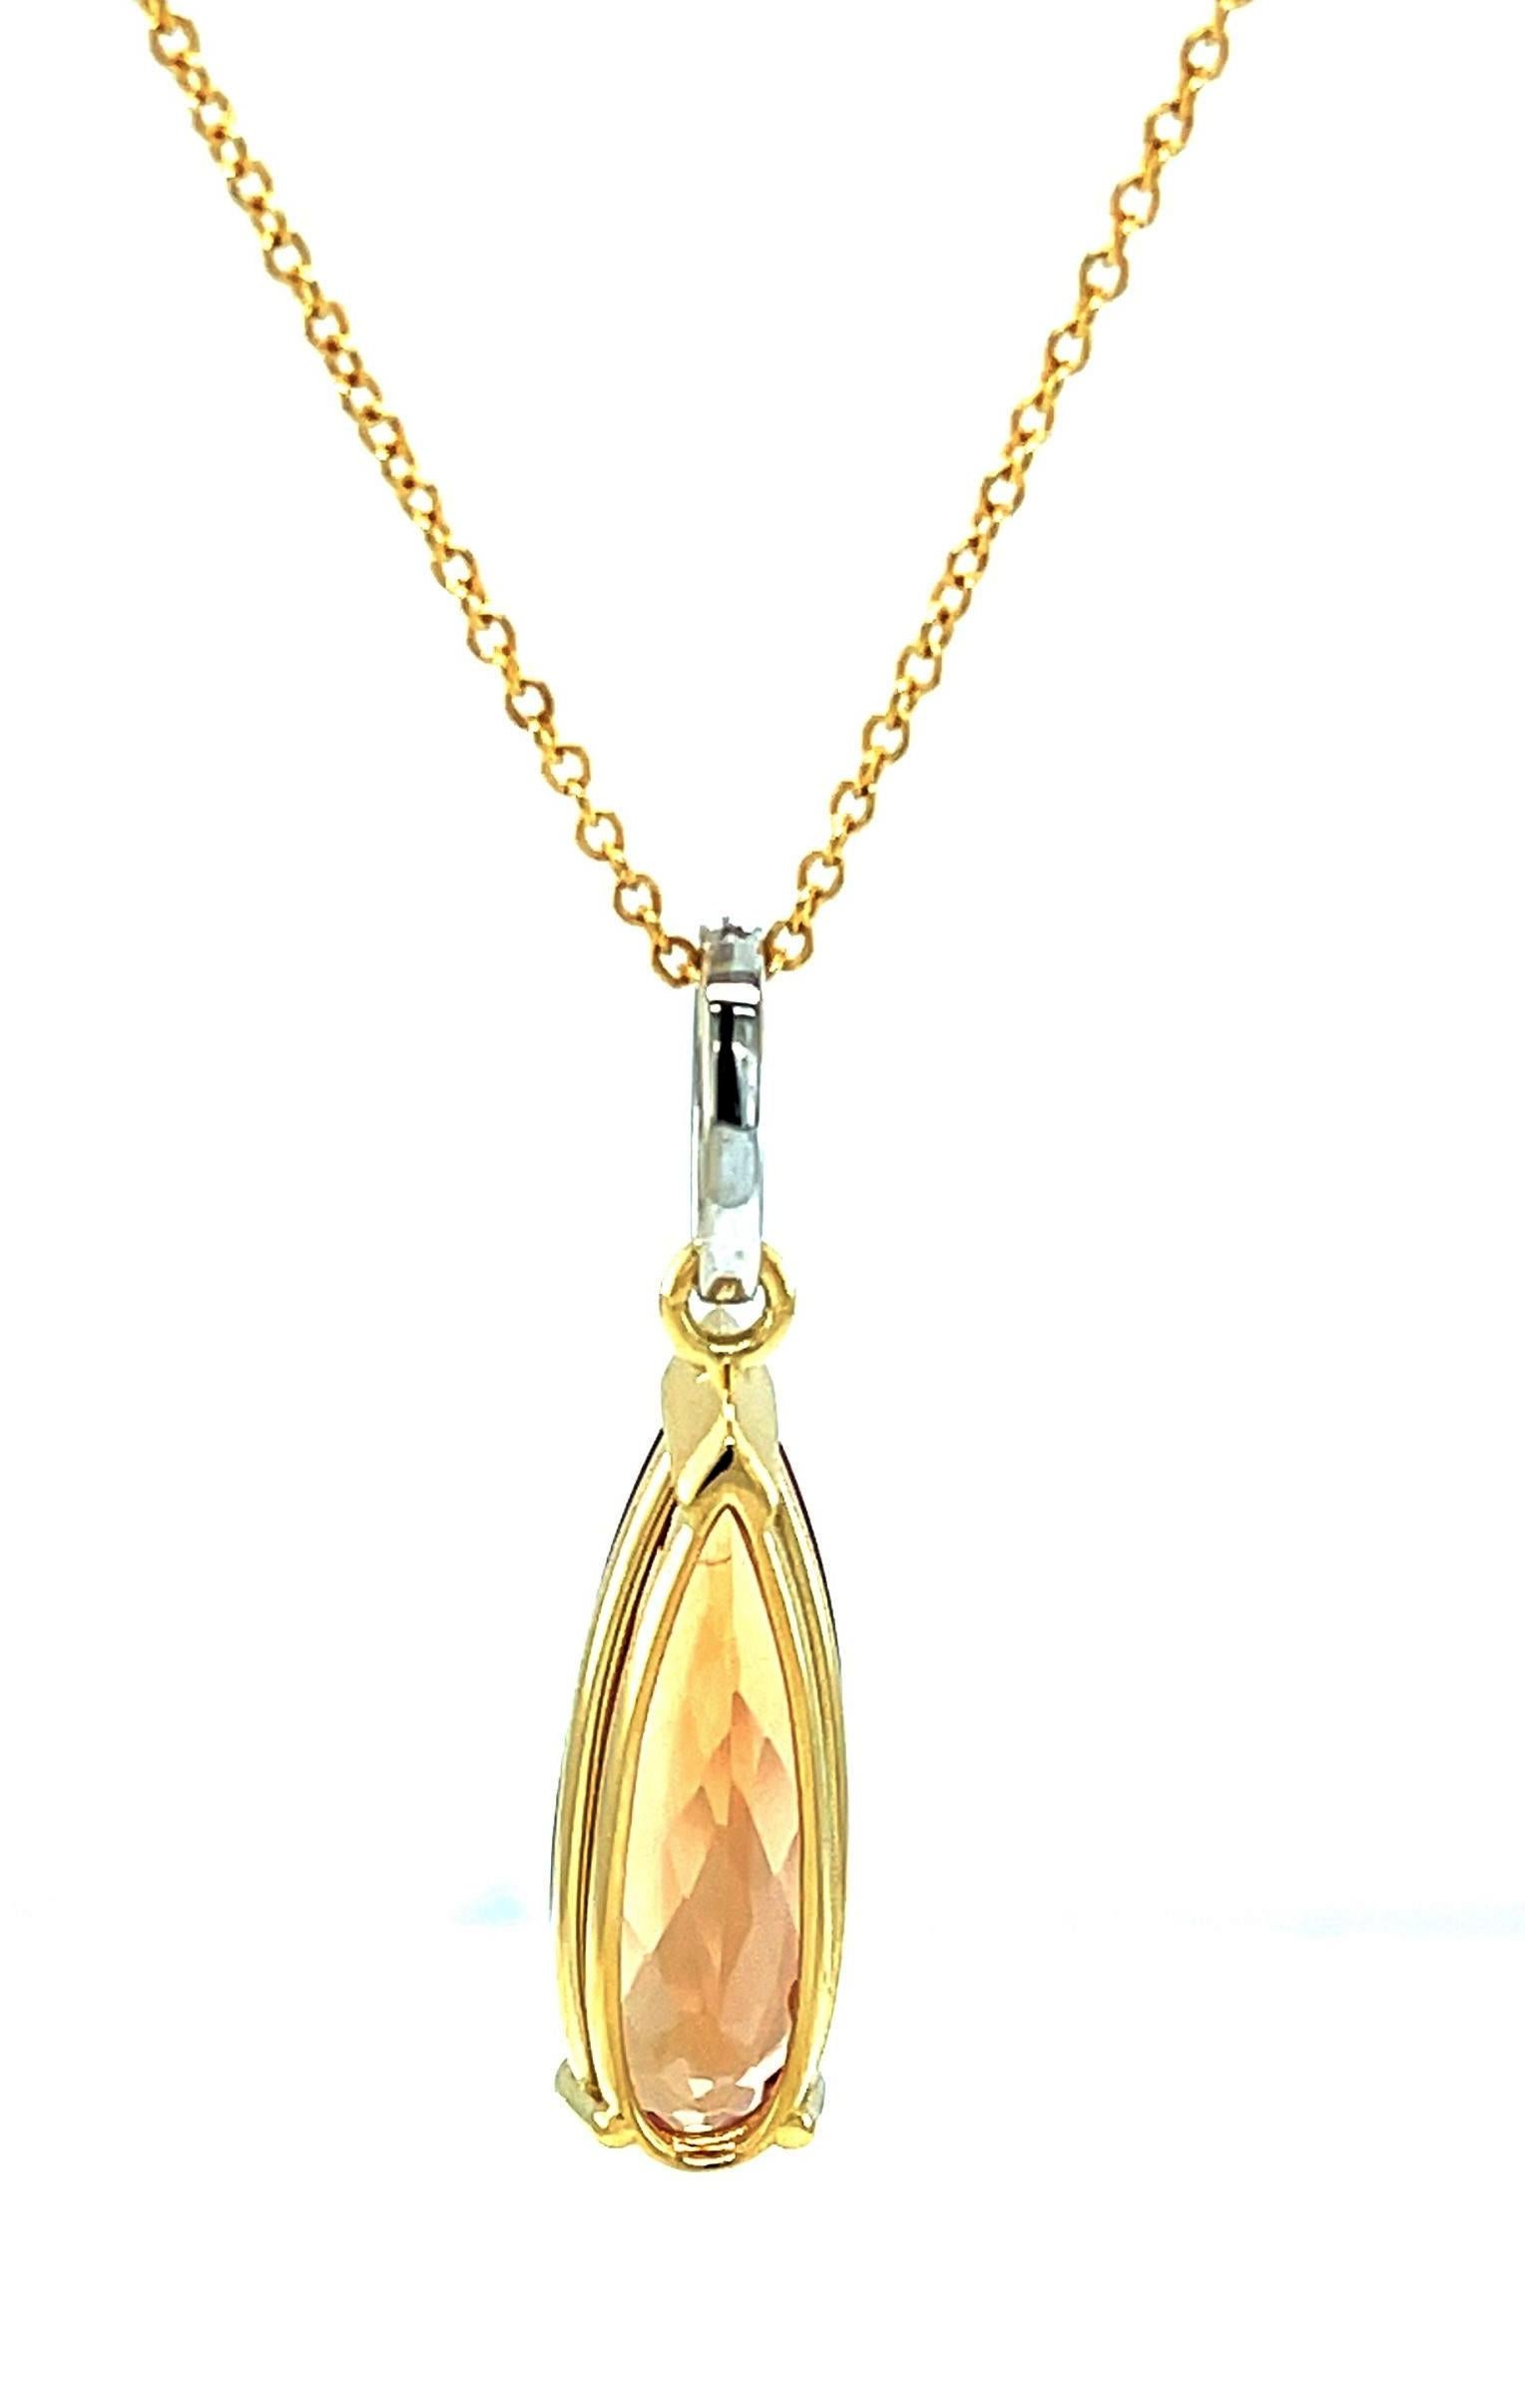 Artisan Imperial Topaz and Diamond Drop Necklace in White and Yellow Gold, 5.56 Carats